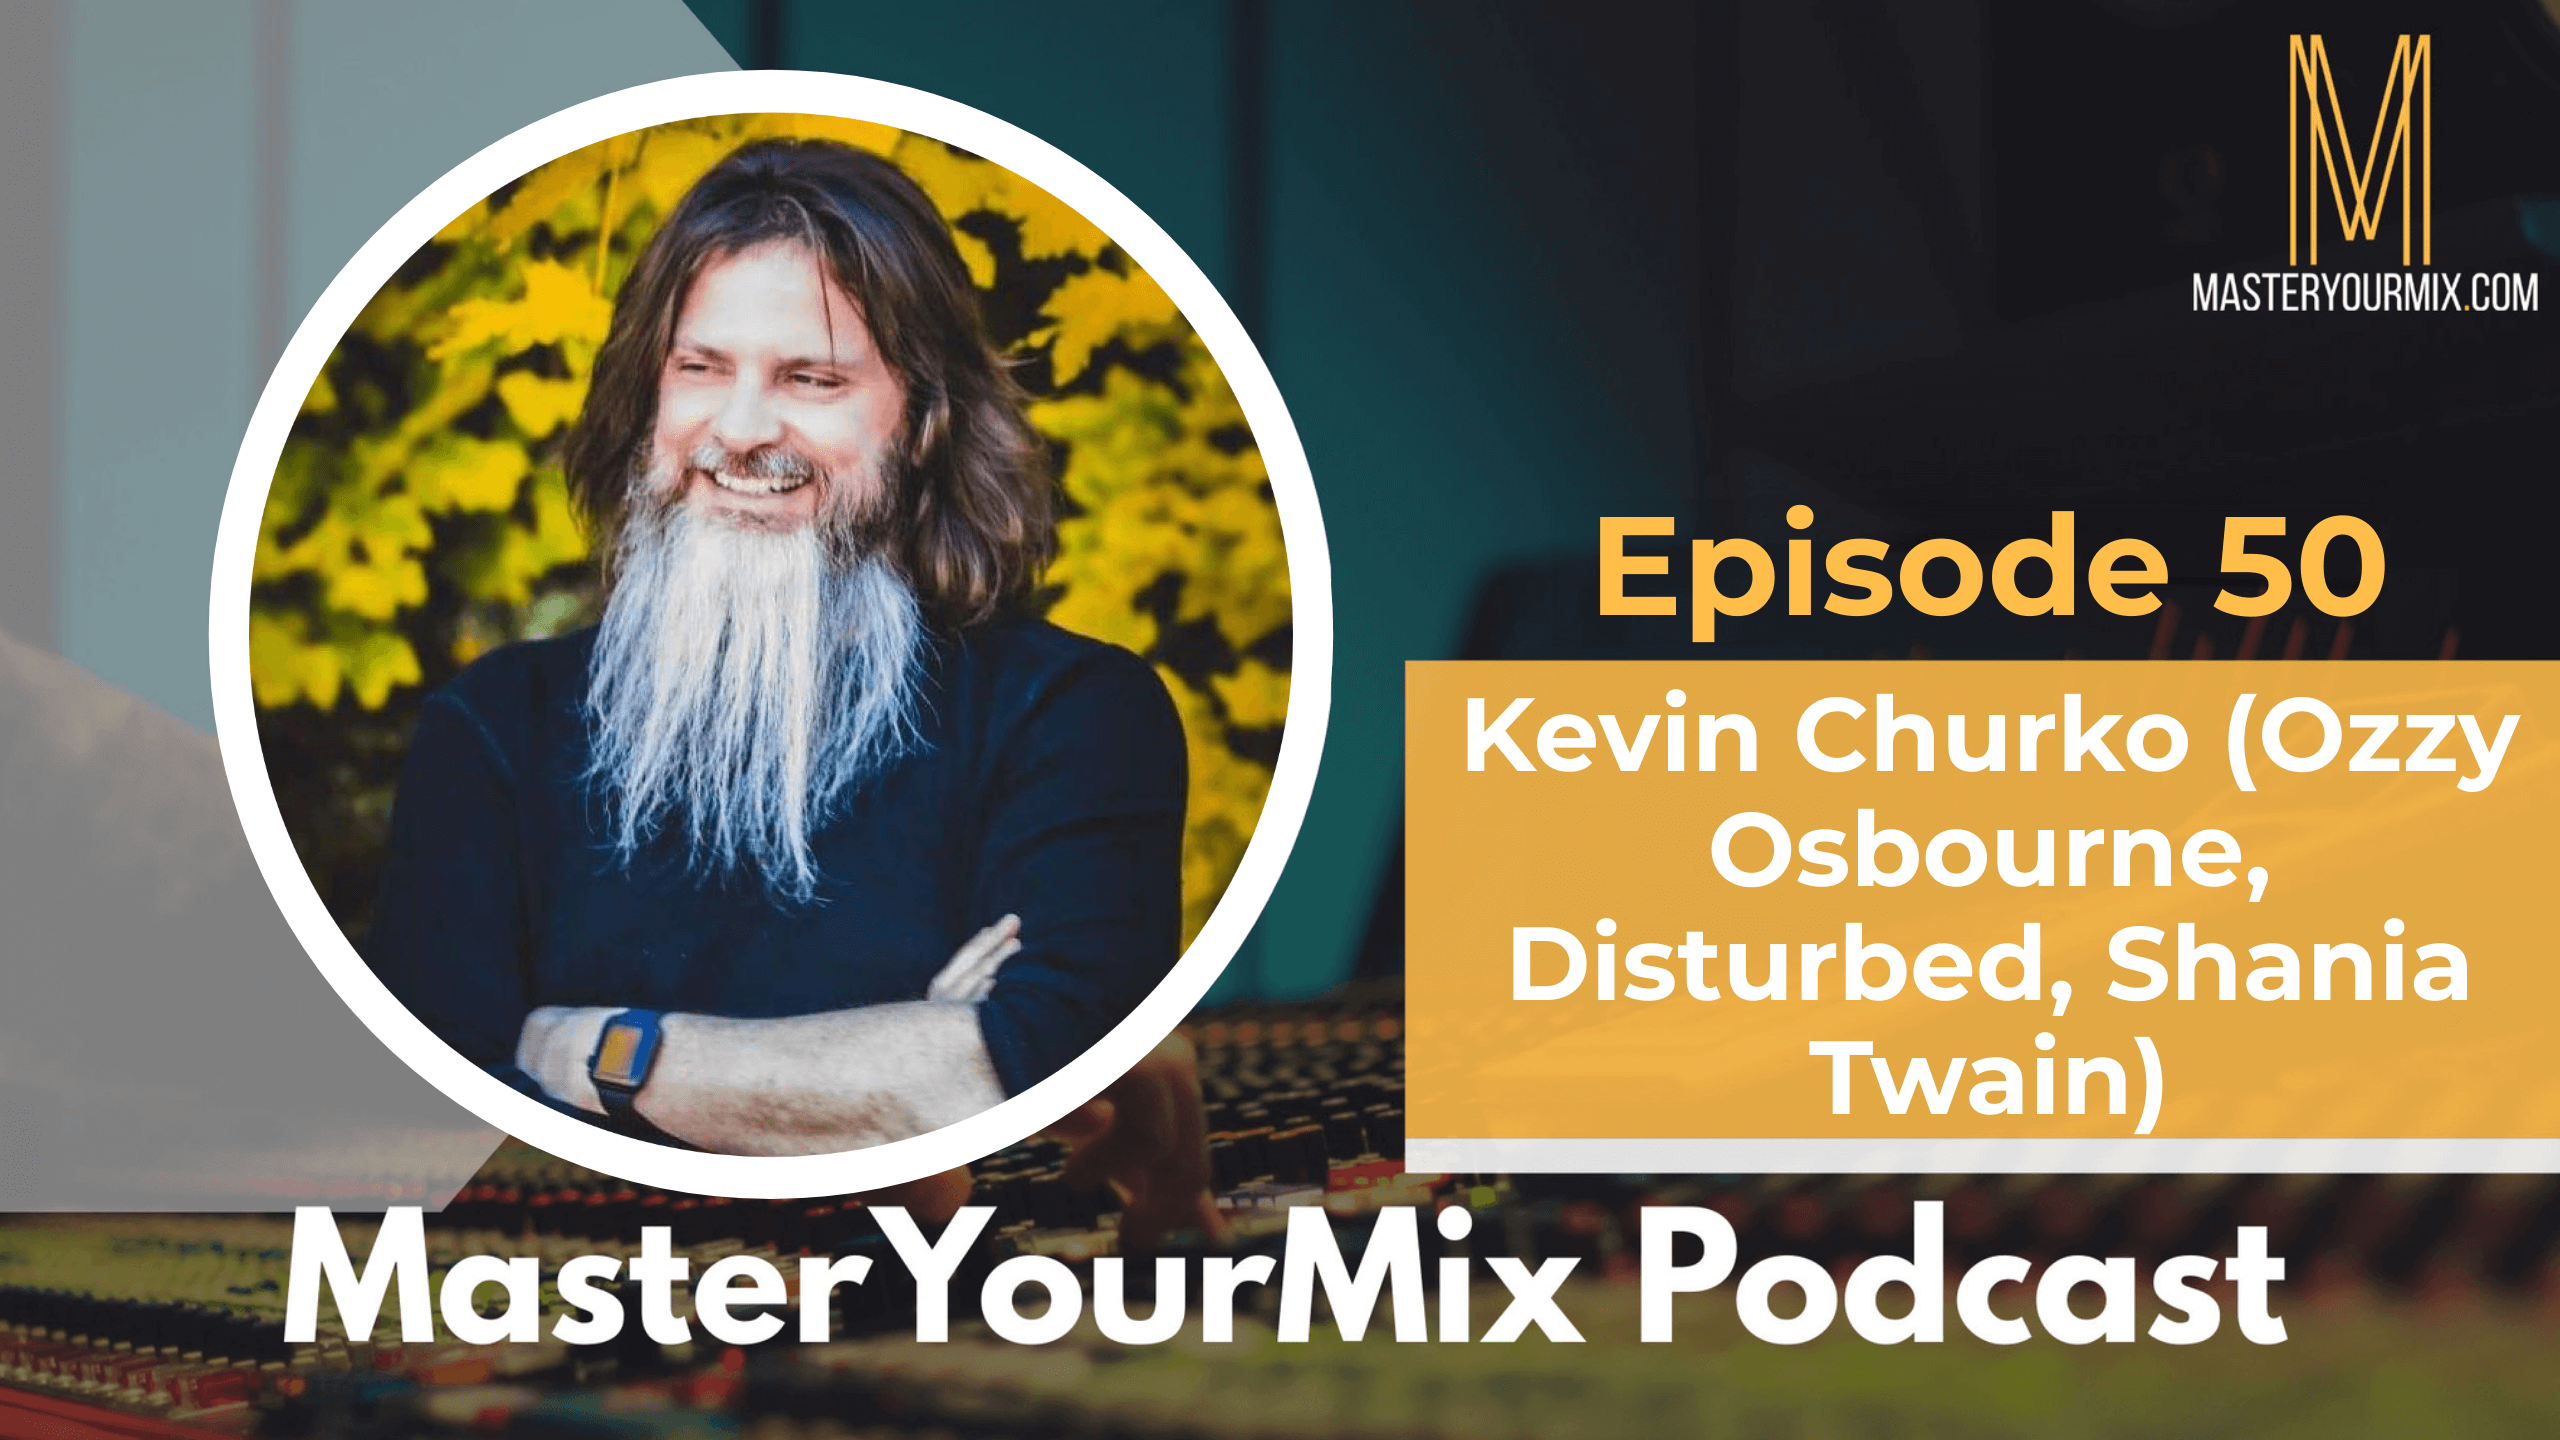 master your mix podcast, ep 50 kevin churko